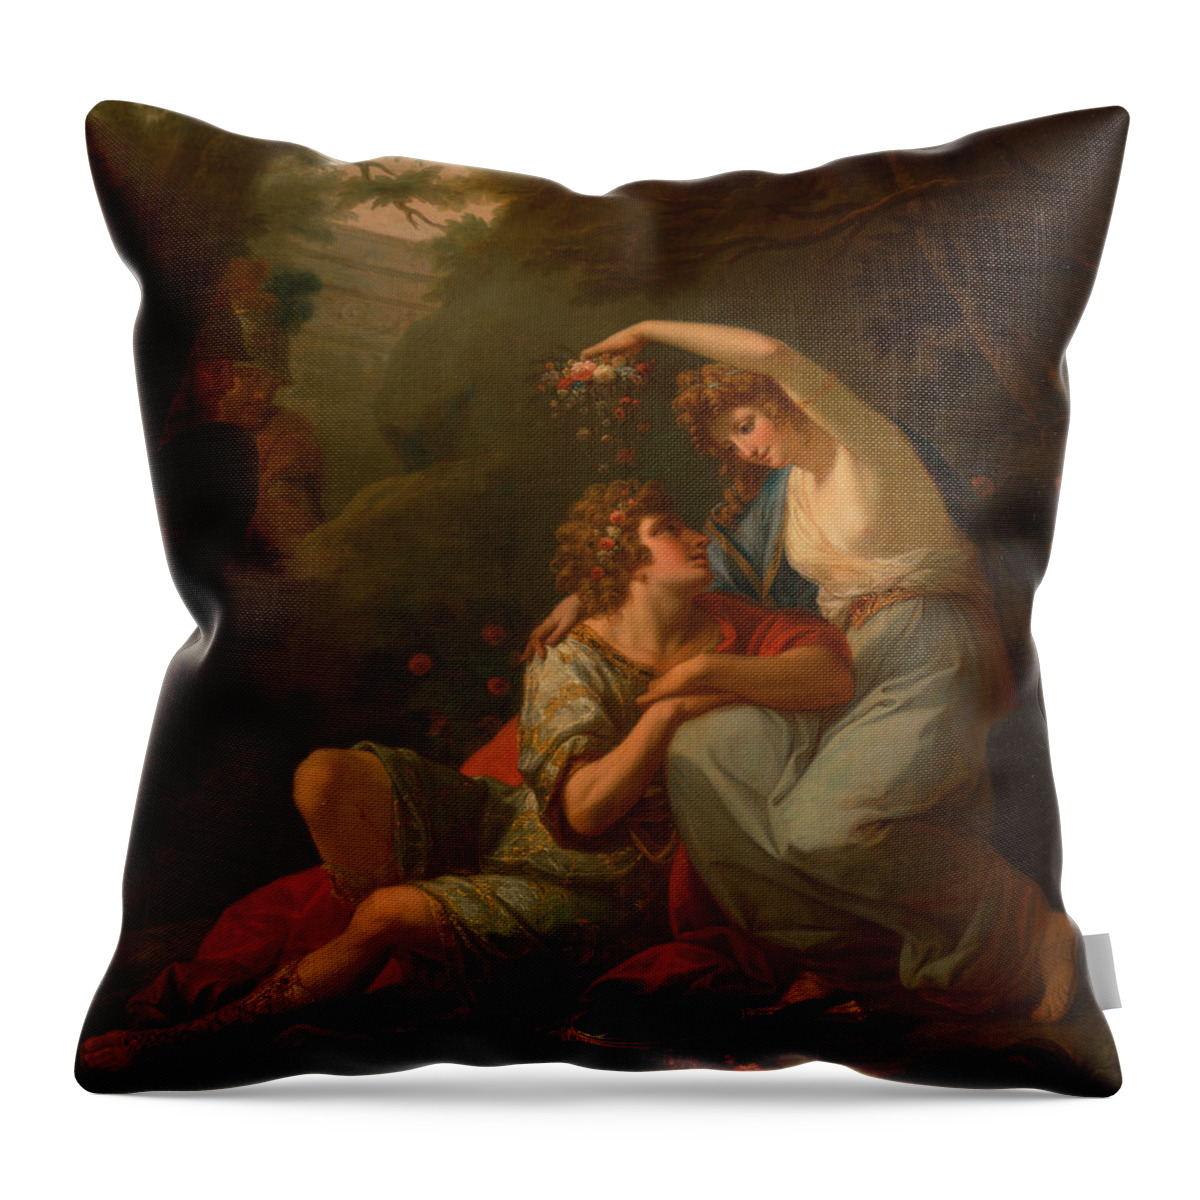 18th Century Art Throw Pillow featuring the painting Rinaldo and Armida by Angelica Kauffman